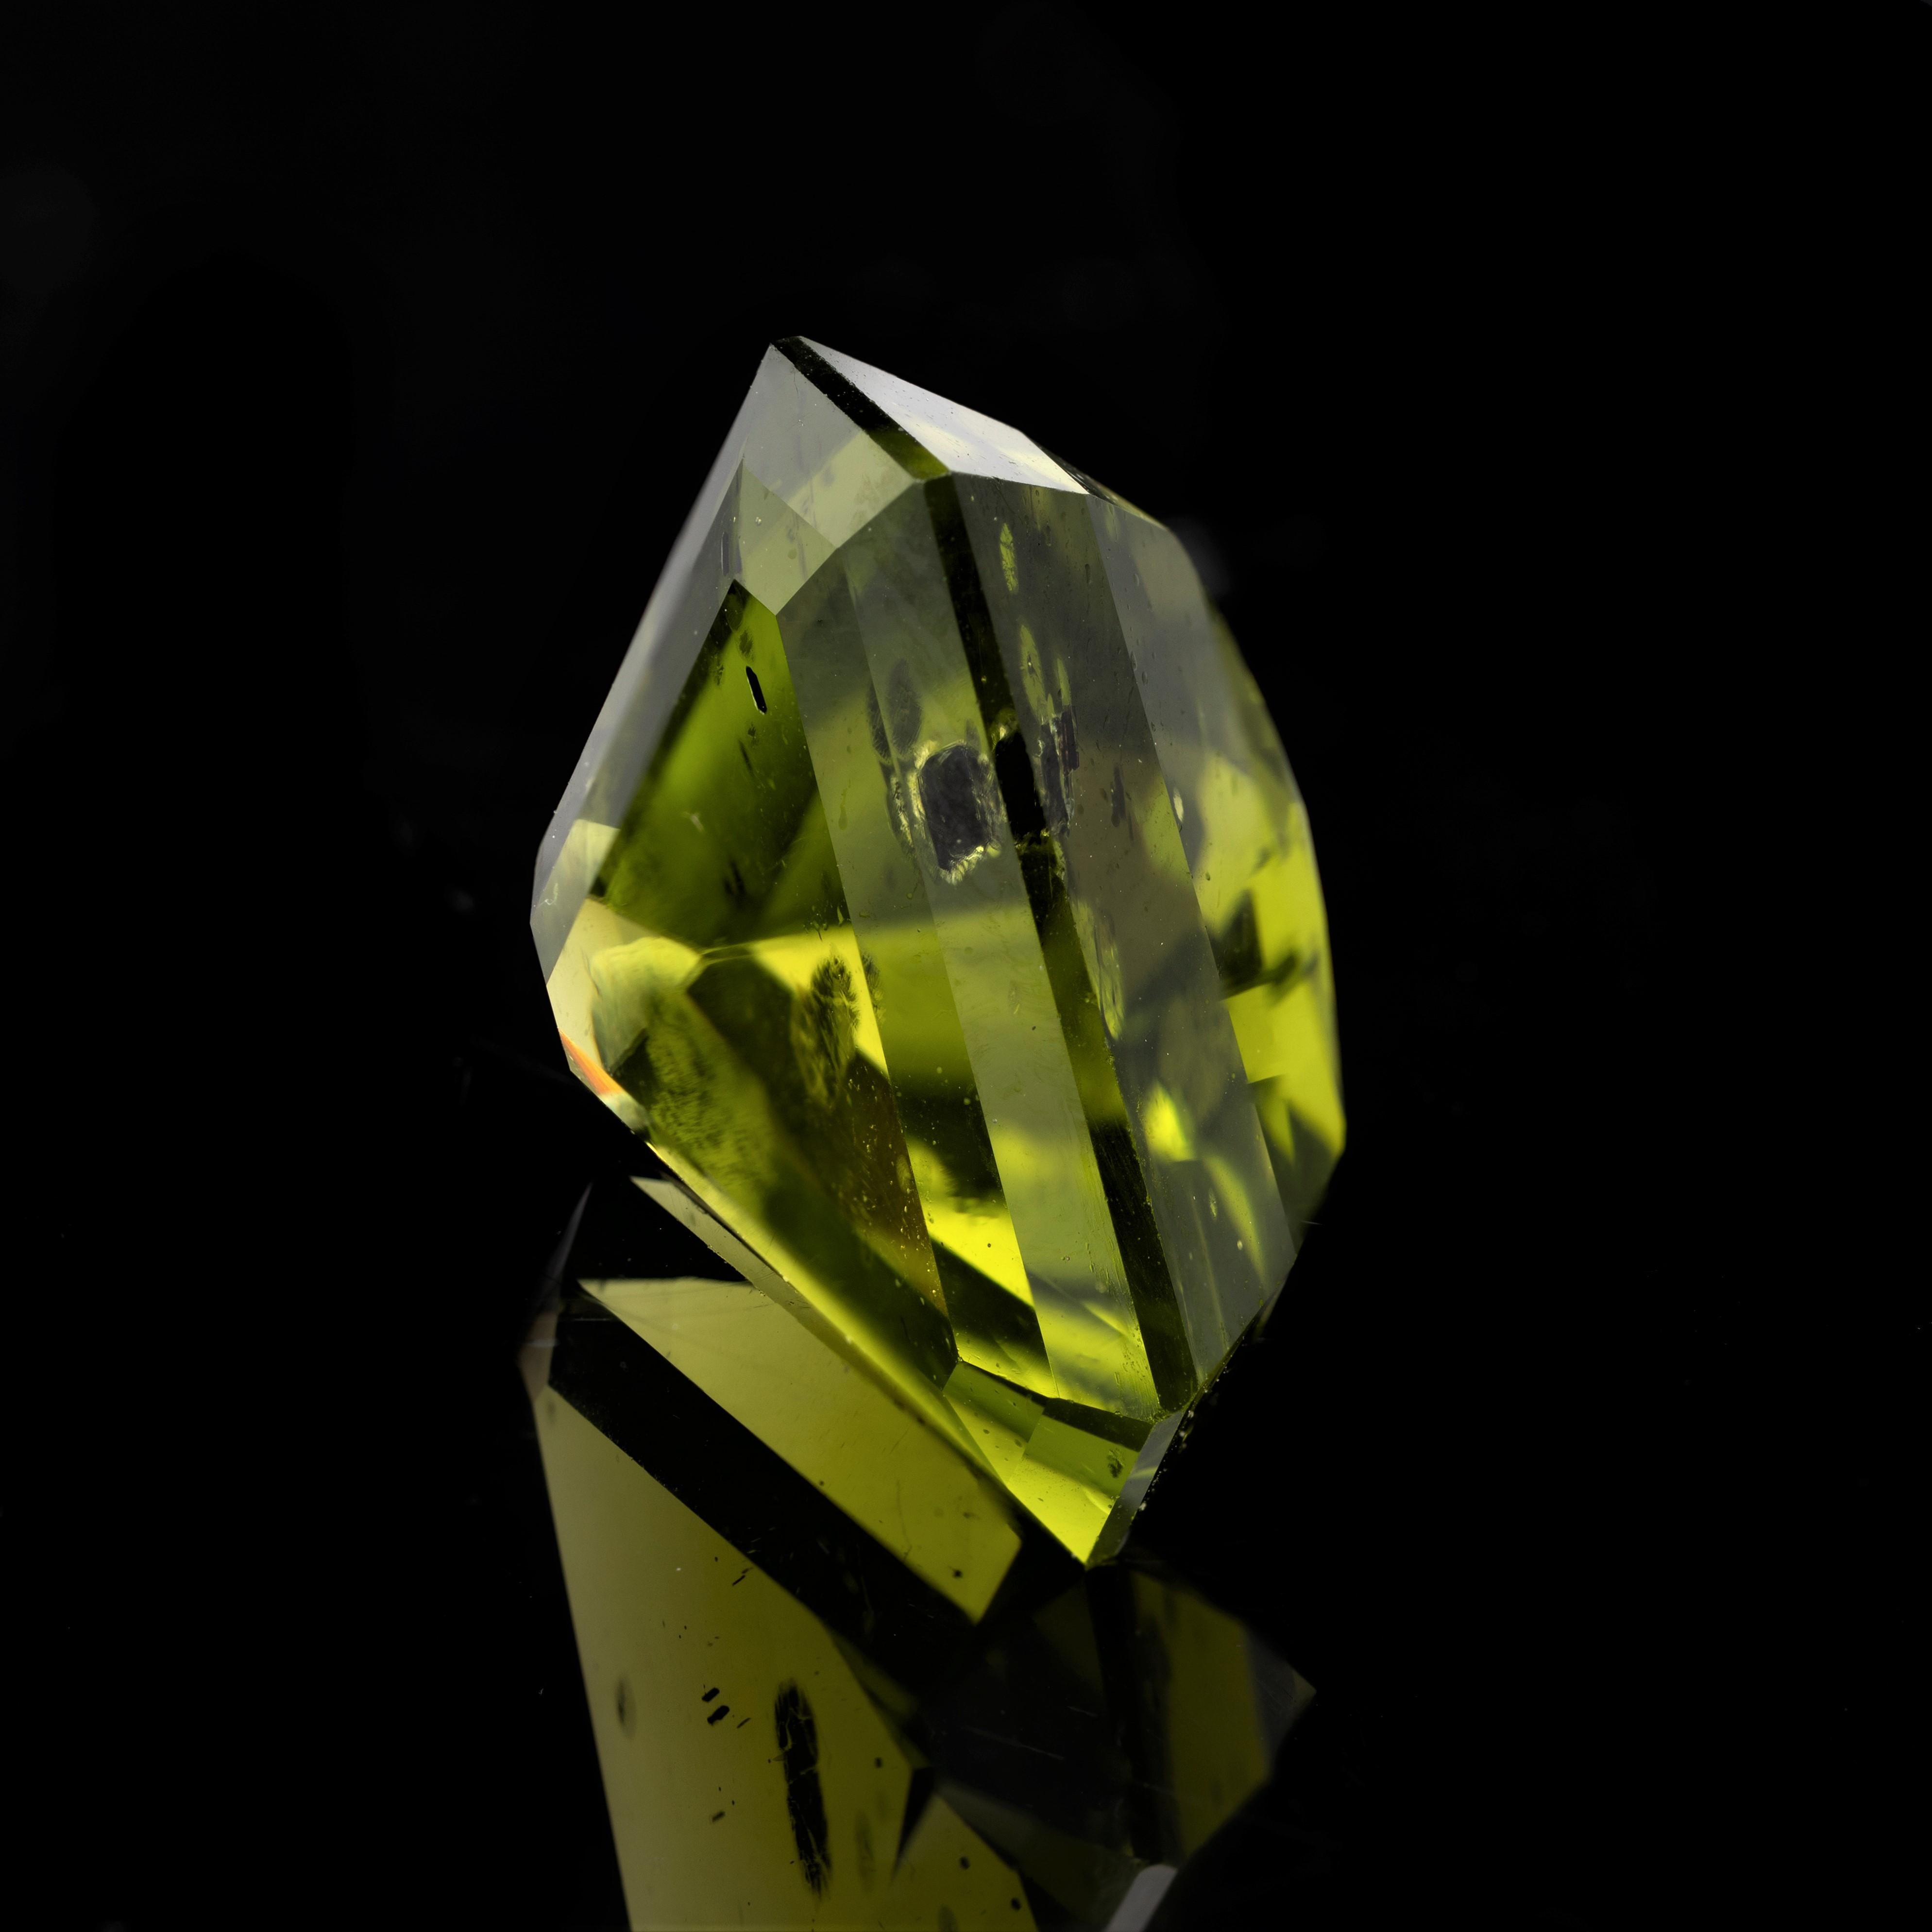 This modified trillion cut peridot from Pakistan displays an olive green hue and good clarity with a chromite inclusion. The very large crystal of chromite is eye-visible and a fascinating contrast to the translucency of the peridot. This double